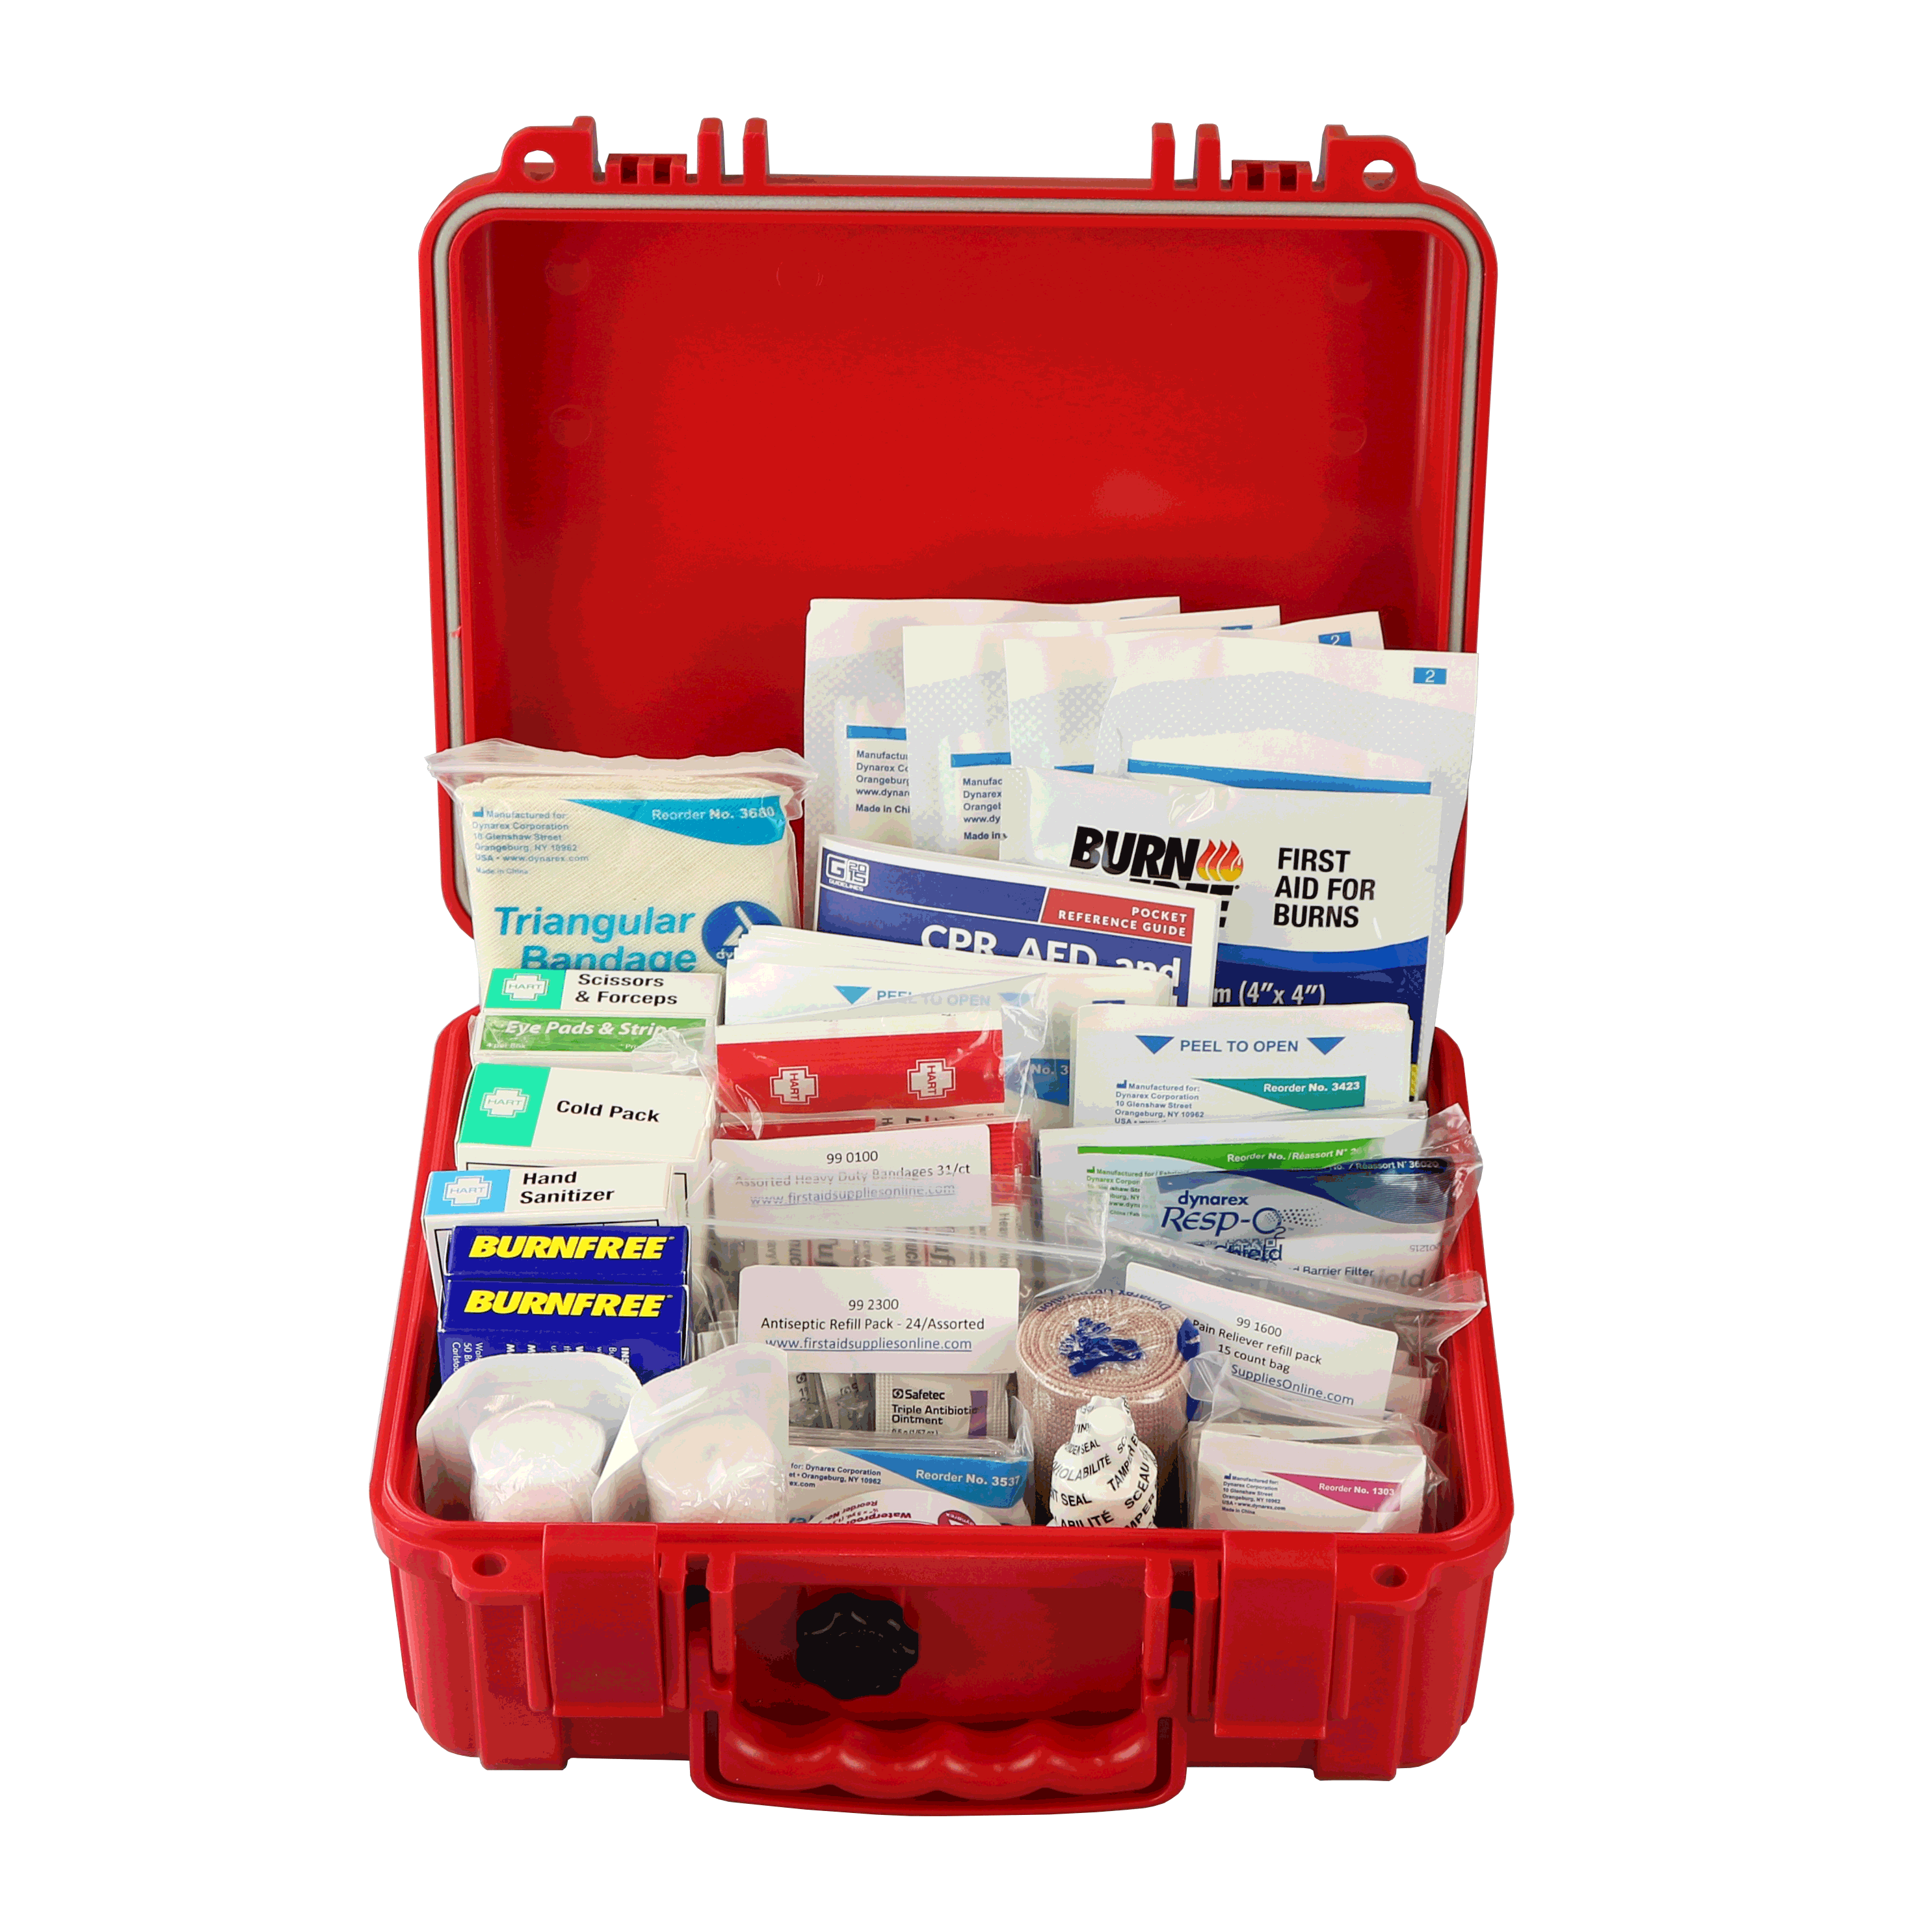 Rugged Class A First Aid Small • First Aid Supplies Online